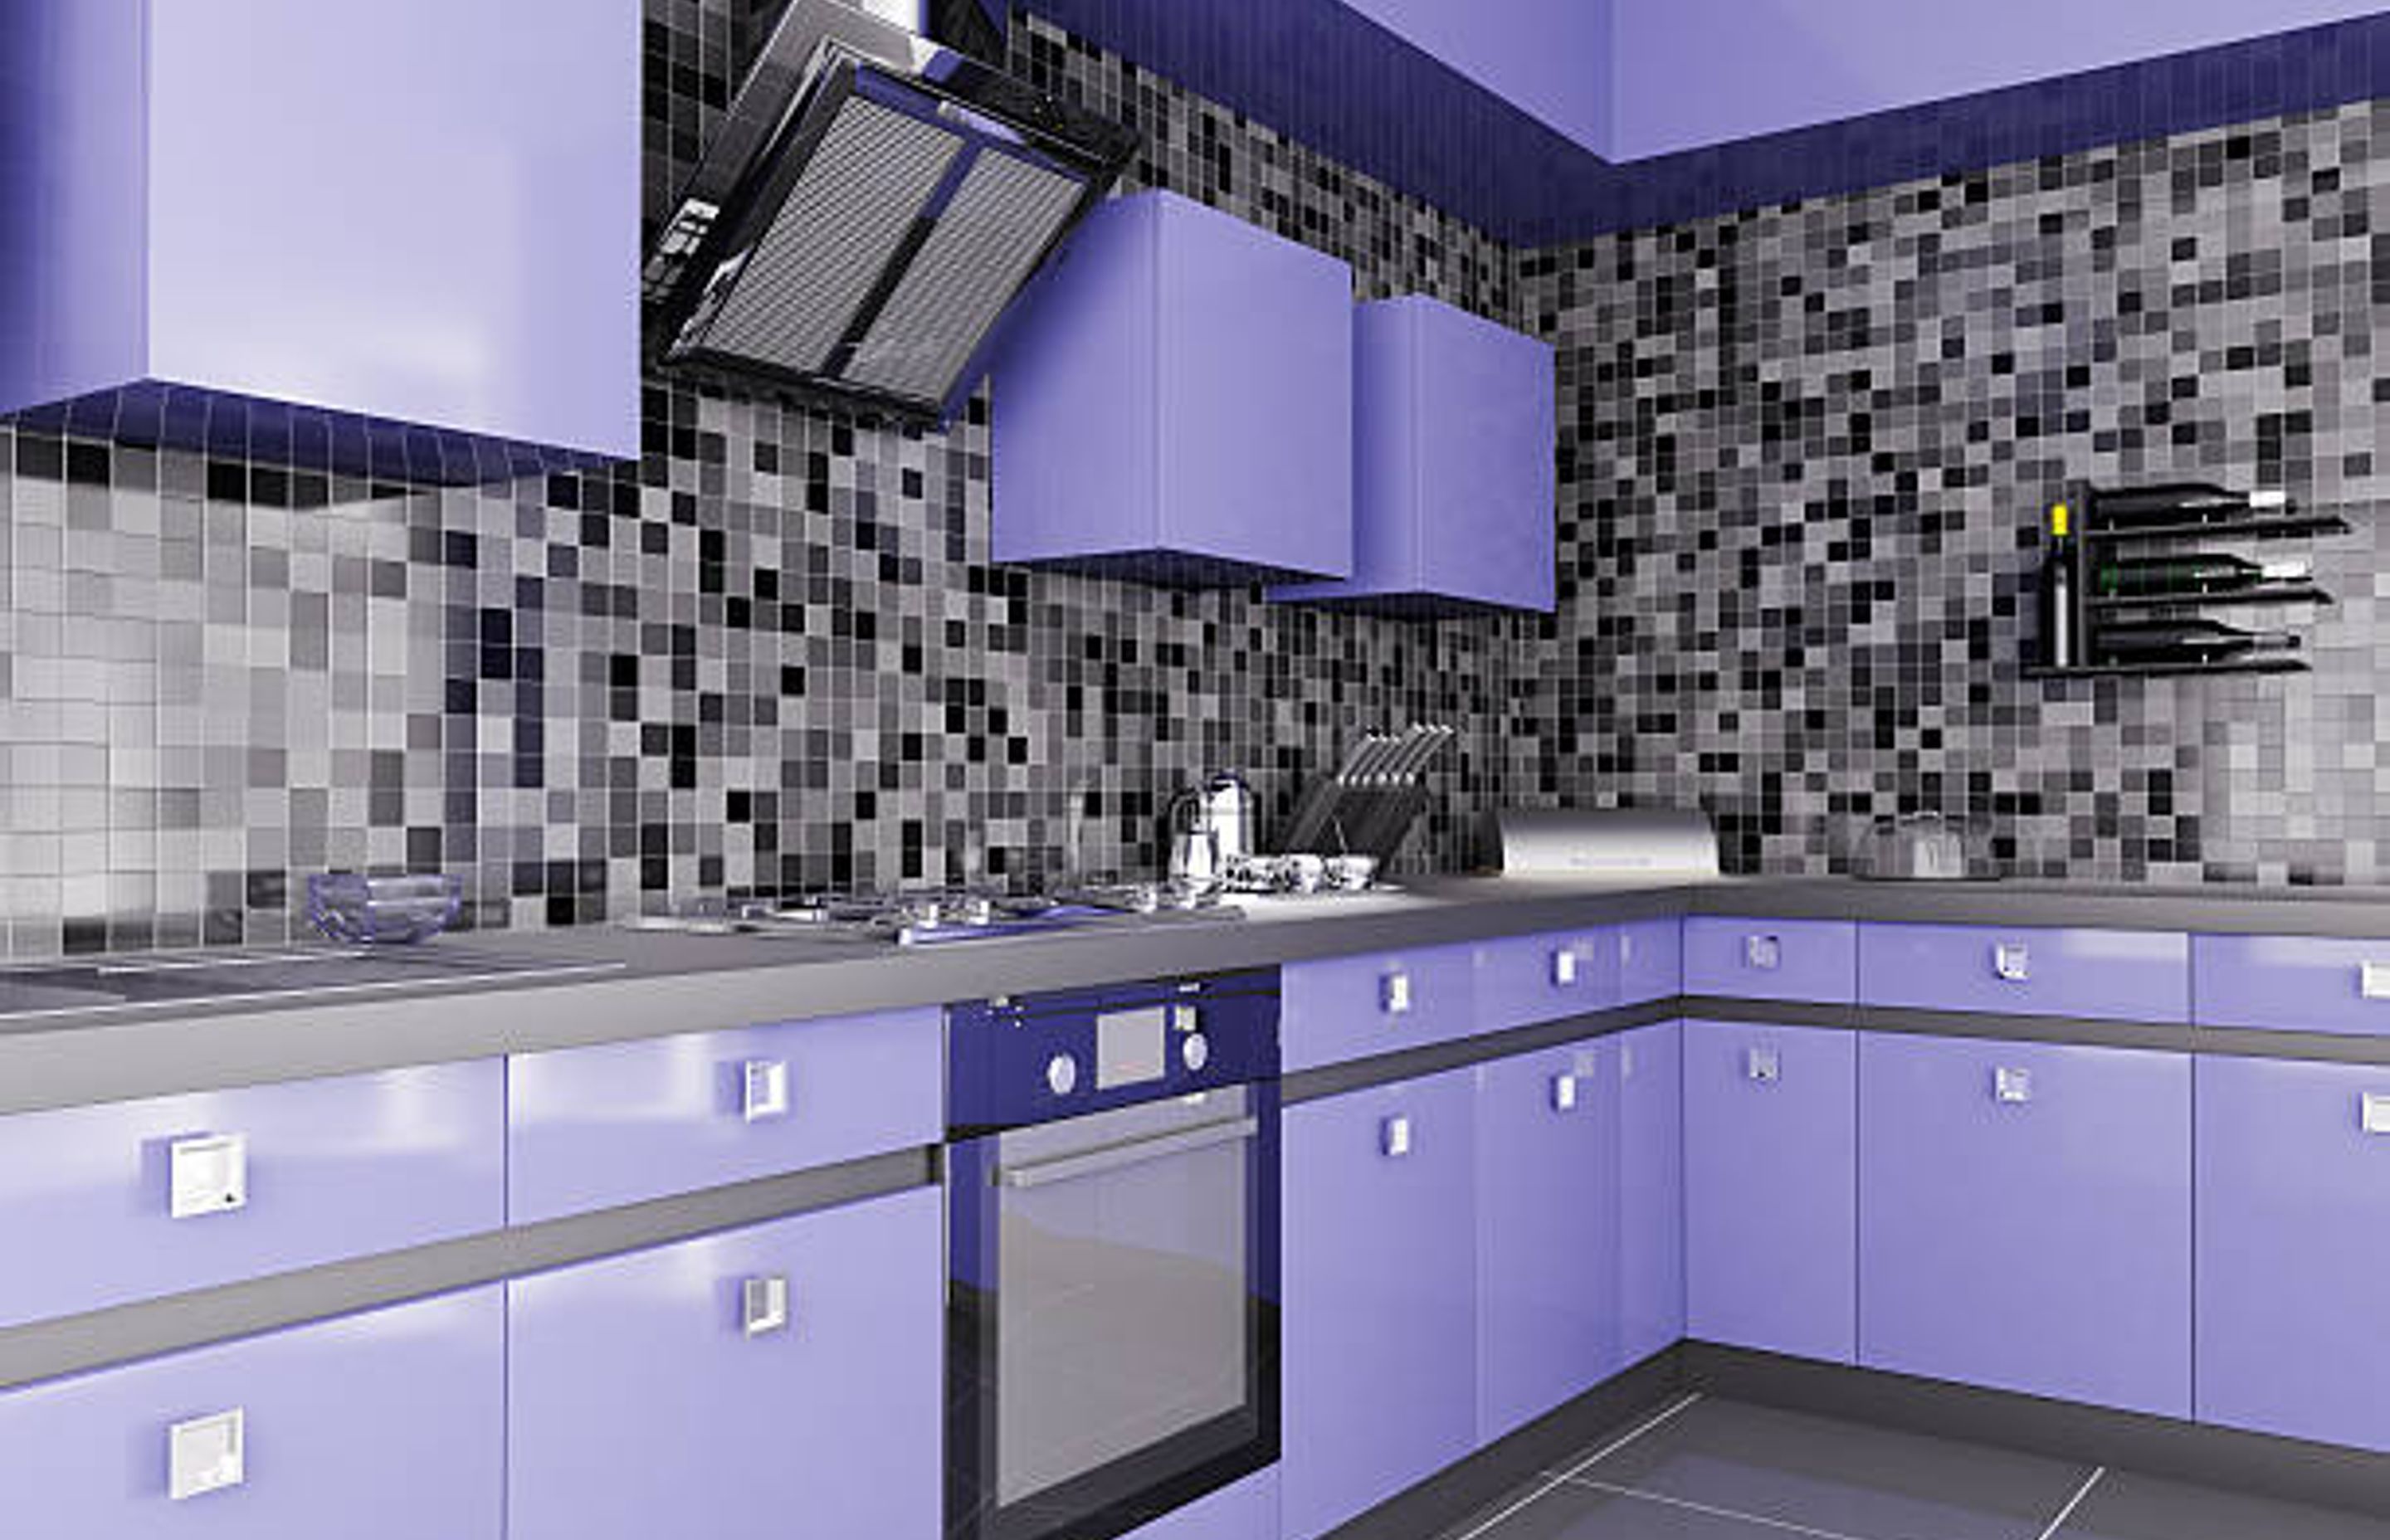 Use of Grey and Purple in this kitchen colour scheme | Photo Credit - iStock